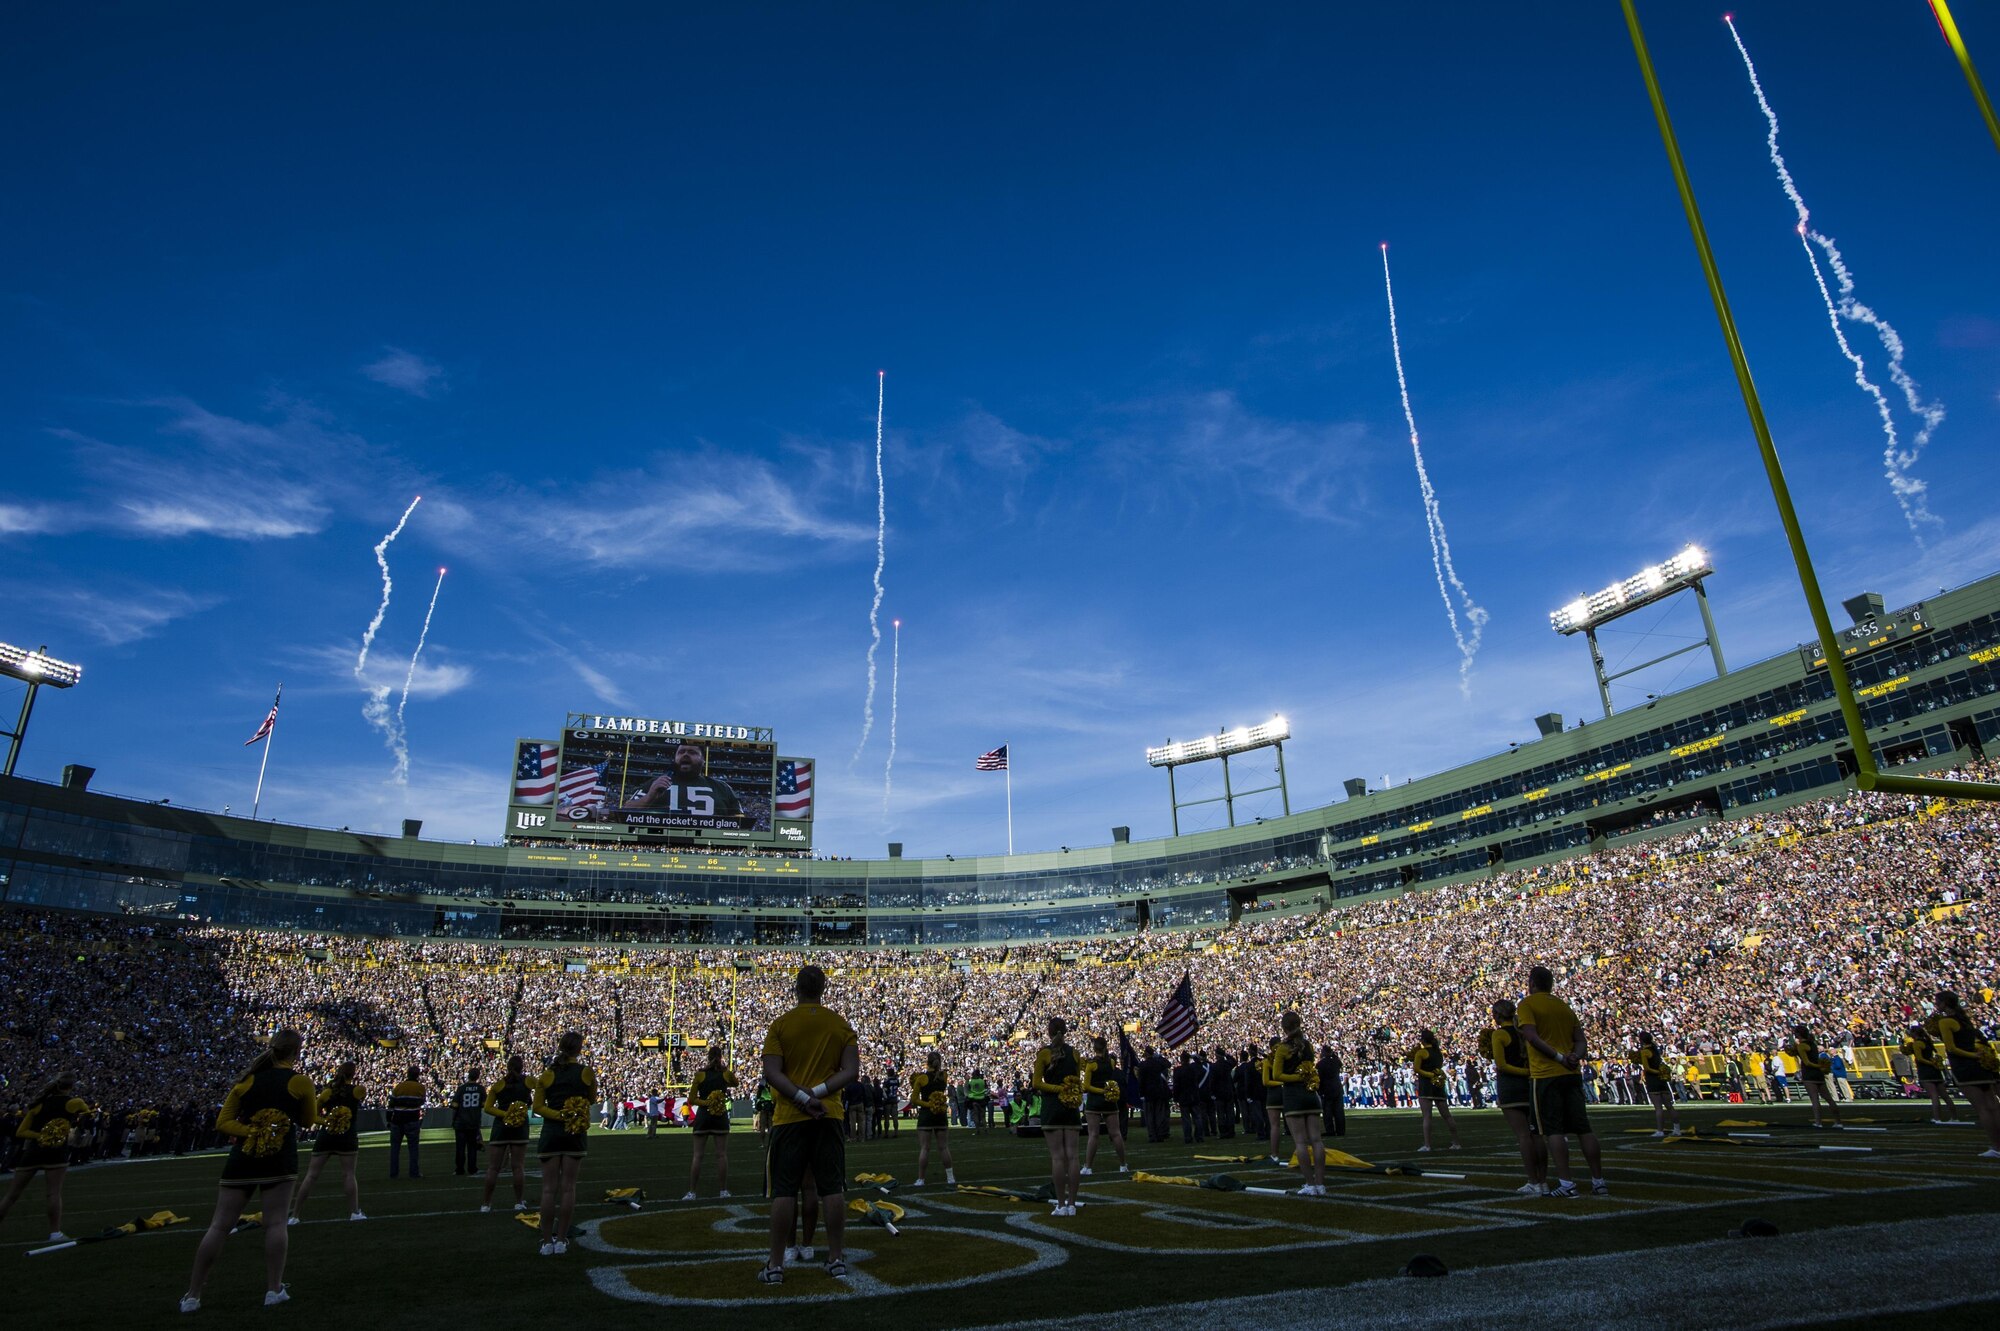 Players and fans stand for the national anthem at Lambeau Field, Wis., Oct. 16, 2016. Moments later, four CV-22 Osprey aircraft with the 8th Special Operations Squadron from Hurlburt Field flew above the stadium. The Osprey is a tiltrotor aircraft that combines the vertical takeoff, hover and vertical landing qualities of a helicopter with the long-range, fuel efficiency and speed characteristics of a turboprop aircraft. (U.S. Air Force photo by Airman 1st Class Joseph Pick)